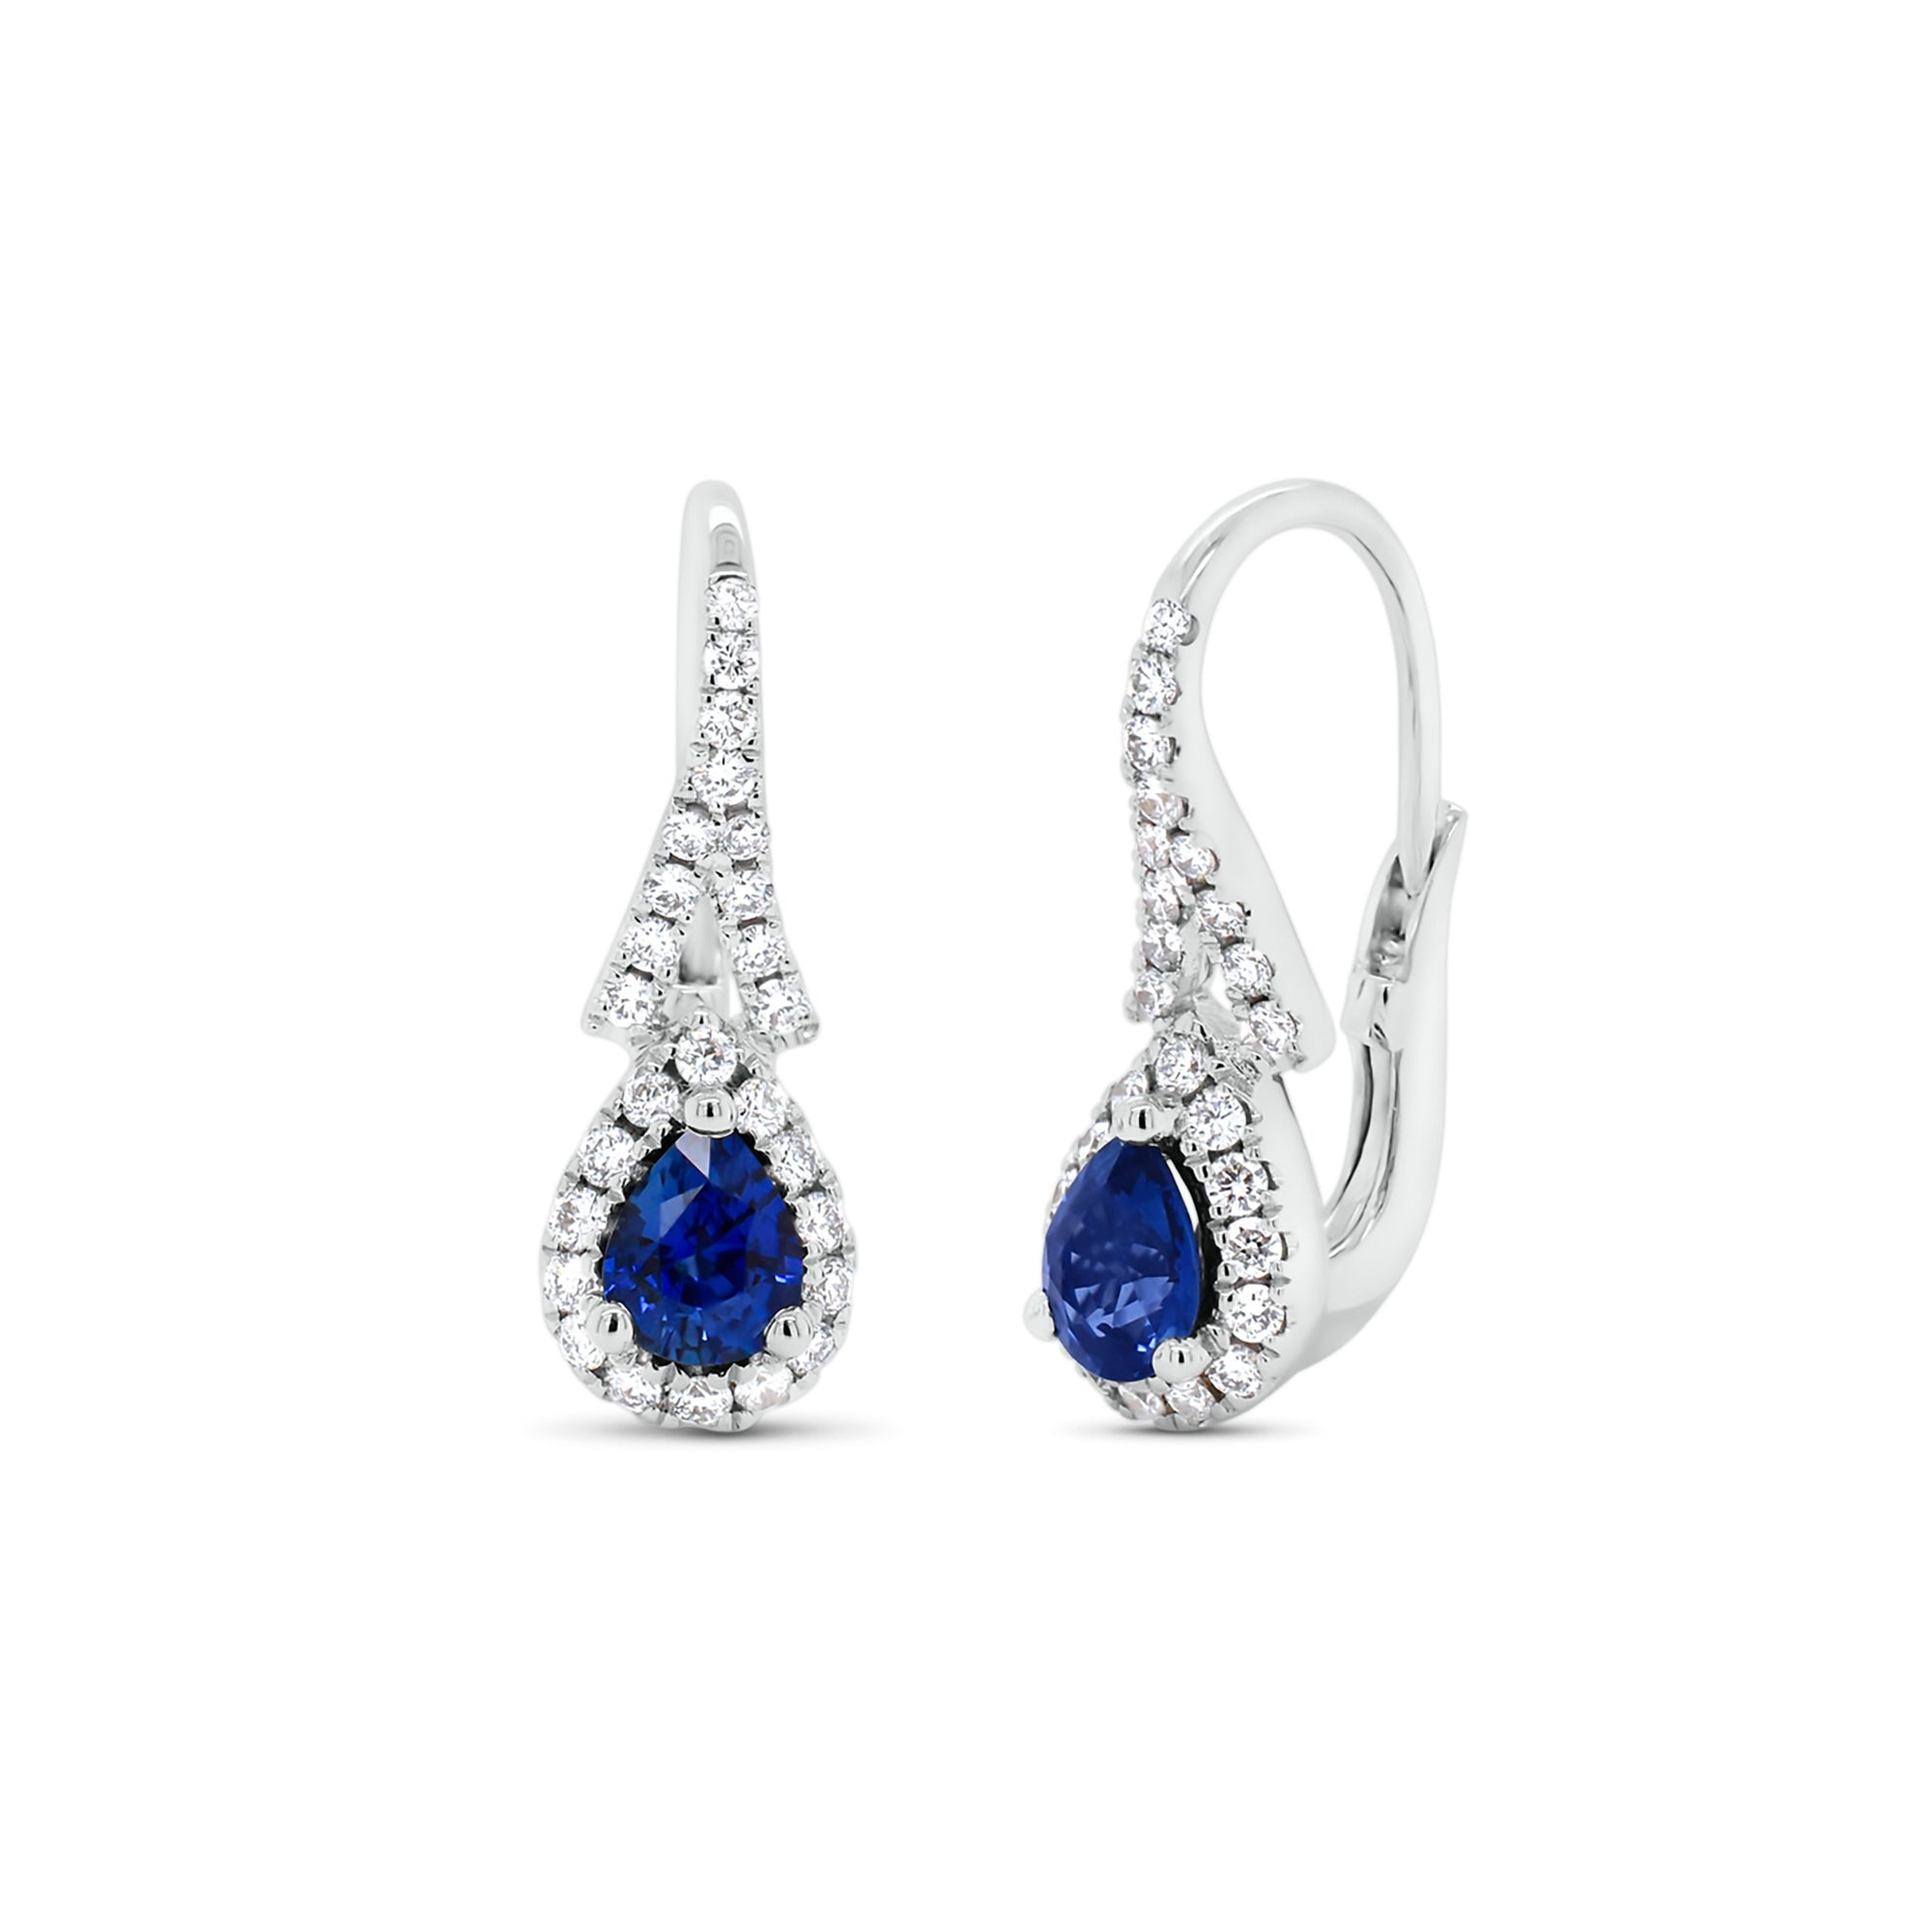 Sapphire Teardrop Lever-Back Earrings  - 18K gold weighing 3.29 grams  - 52 round diamonds totaling 0.33 carats  - 2 pear-shaped sapphires totaling 0.71 carats